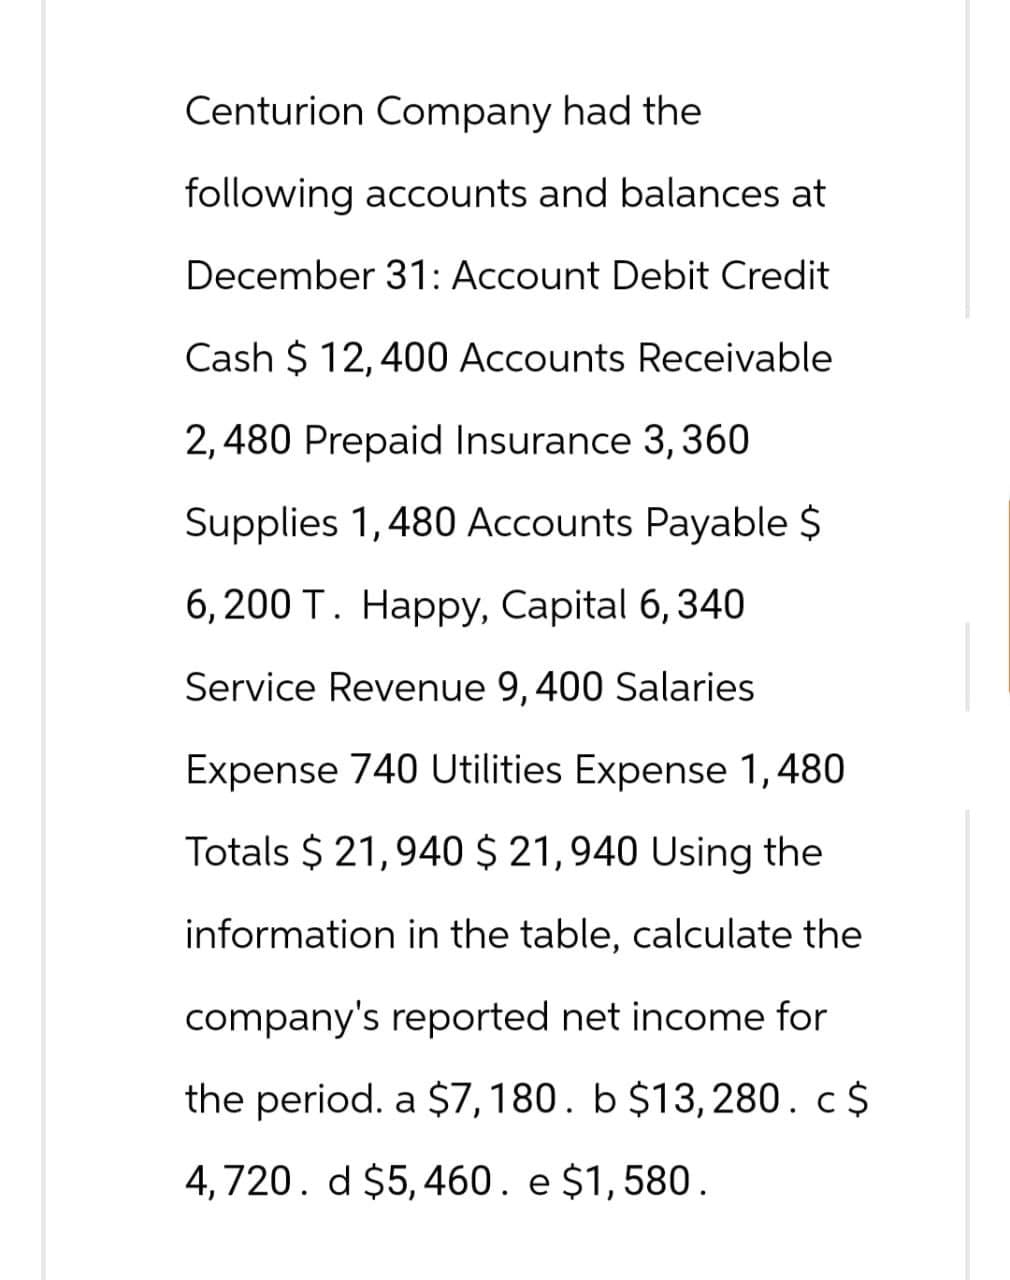 Centurion Company had the
following accounts and balances at
December 31: Account Debit Credit
Cash $12, 400 Accounts Receivable
2,480 Prepaid Insurance 3, 360
Supplies 1,480 Accounts Payable $
6,200 T. Happy, Capital 6,340
Service Revenue 9, 400 Salaries
Expense 740 Utilities Expense 1,480
Totals $ 21,940 $ 21,940 Using the
information in the table, calculate the
company's reported net income for
the period. a $7,180. b $13, 280.c$
4,720. d $5,460. e $1,580.